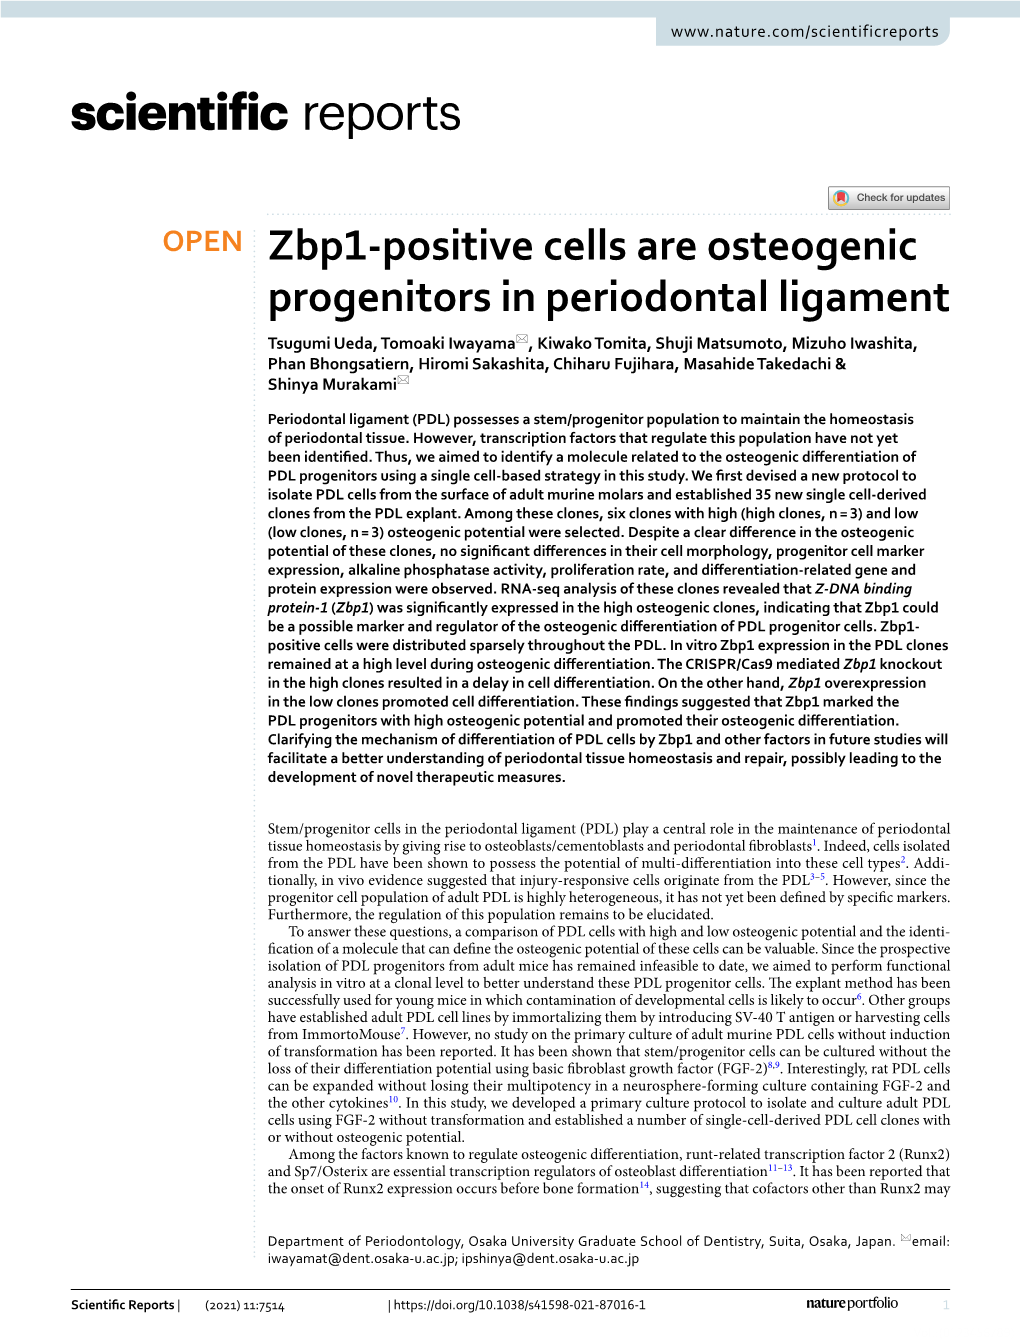 Zbp1-Positive Cells Are Osteogenic Progenitors in Periodontal Ligament